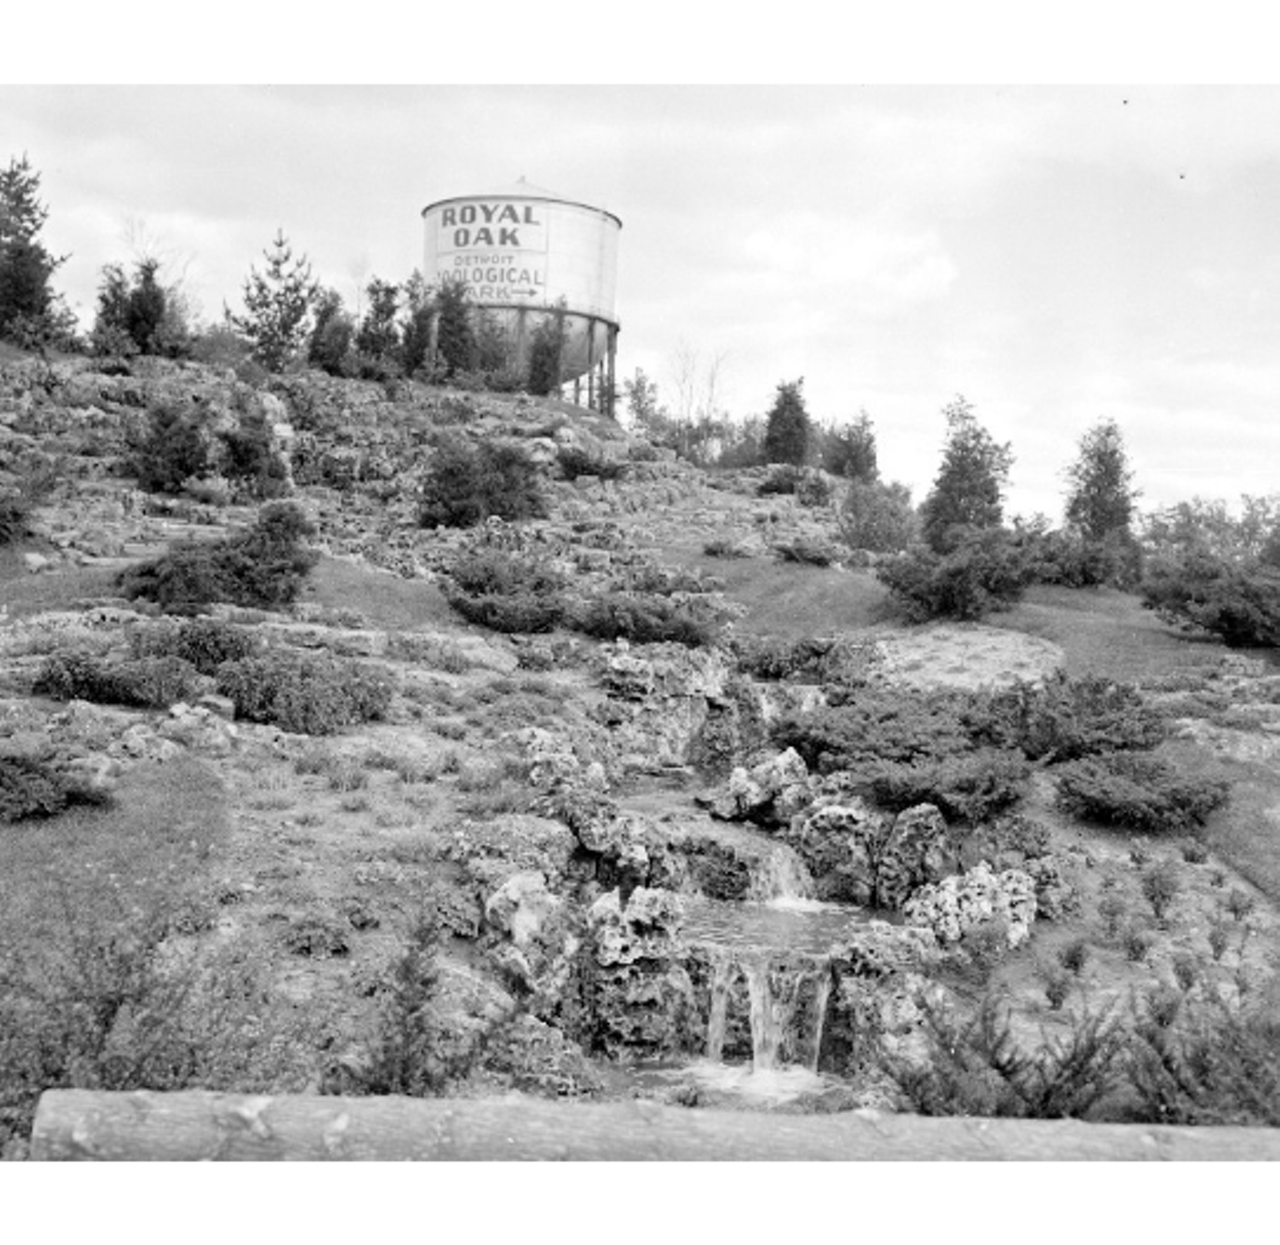 Scenic waterfall, circa 1938. They should build another one of these.